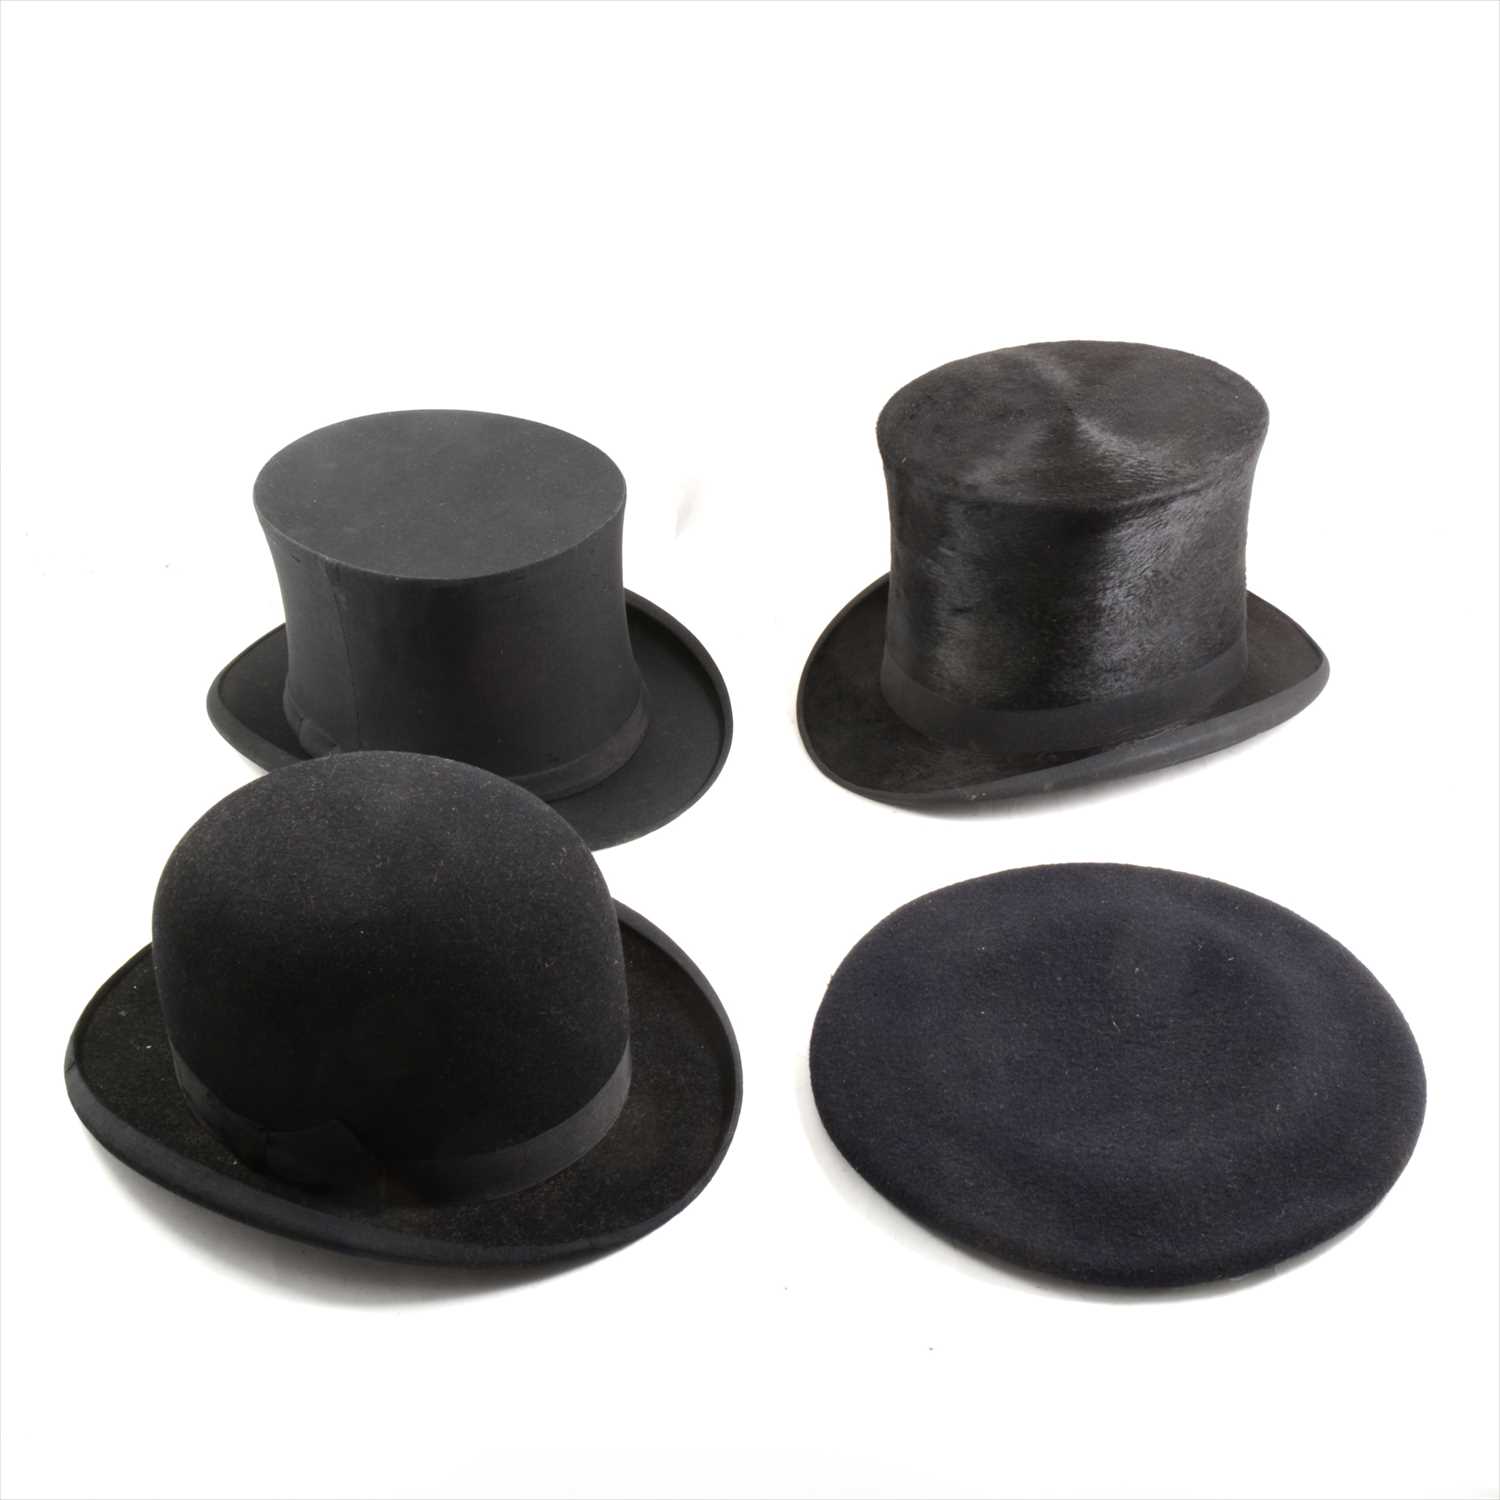 Lot 120 - Stitched leather top hat box, stamped H B Foster, two top hats, bowler hat, etc